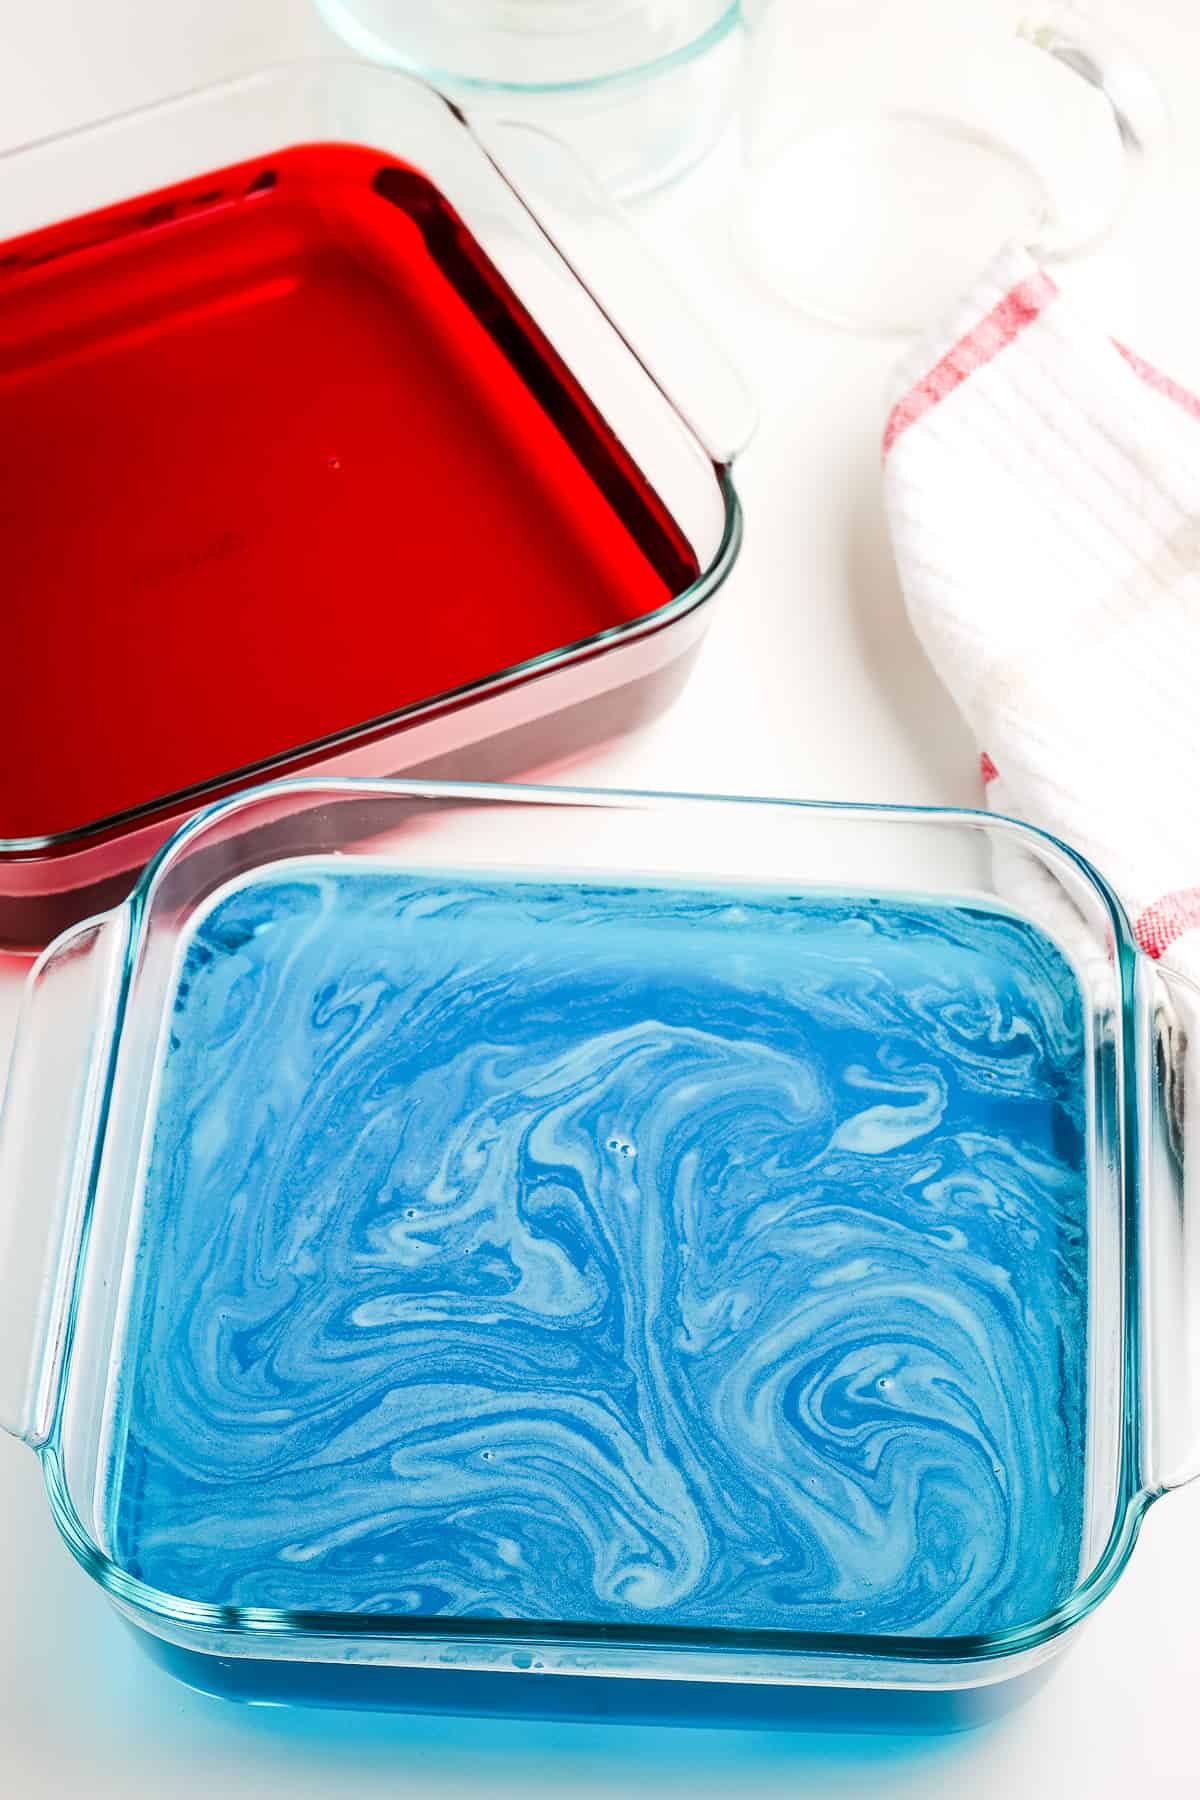 Place Jello in a 8x8 pan and put in the refrigerator for 4 hours